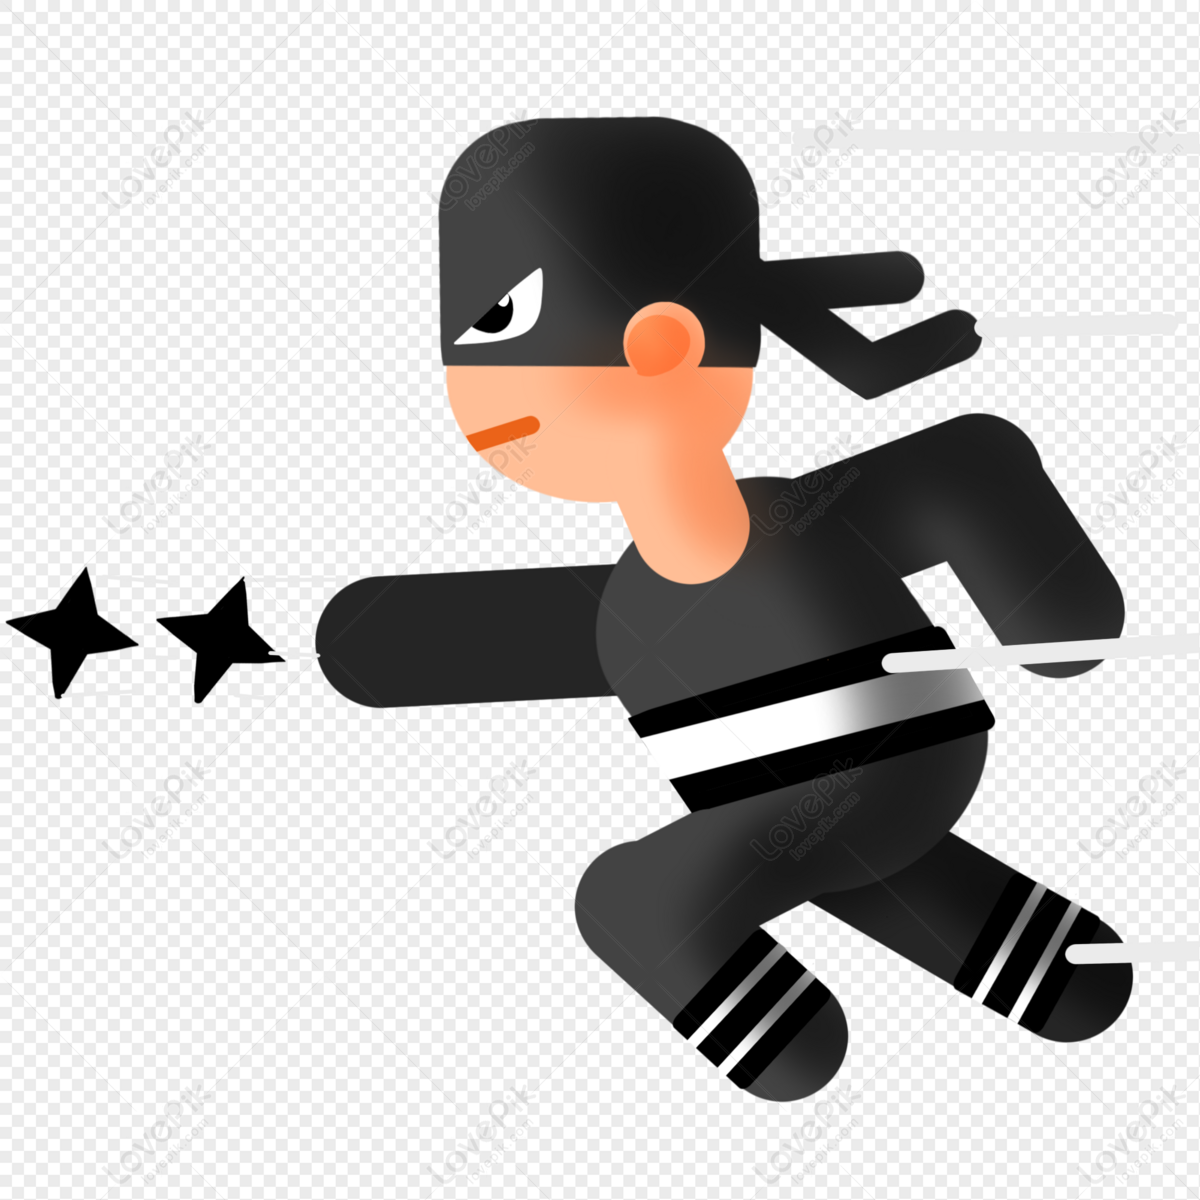 Ninja PNG White Transparent And Clipart Image For Free Download - Lovepik |  401376282